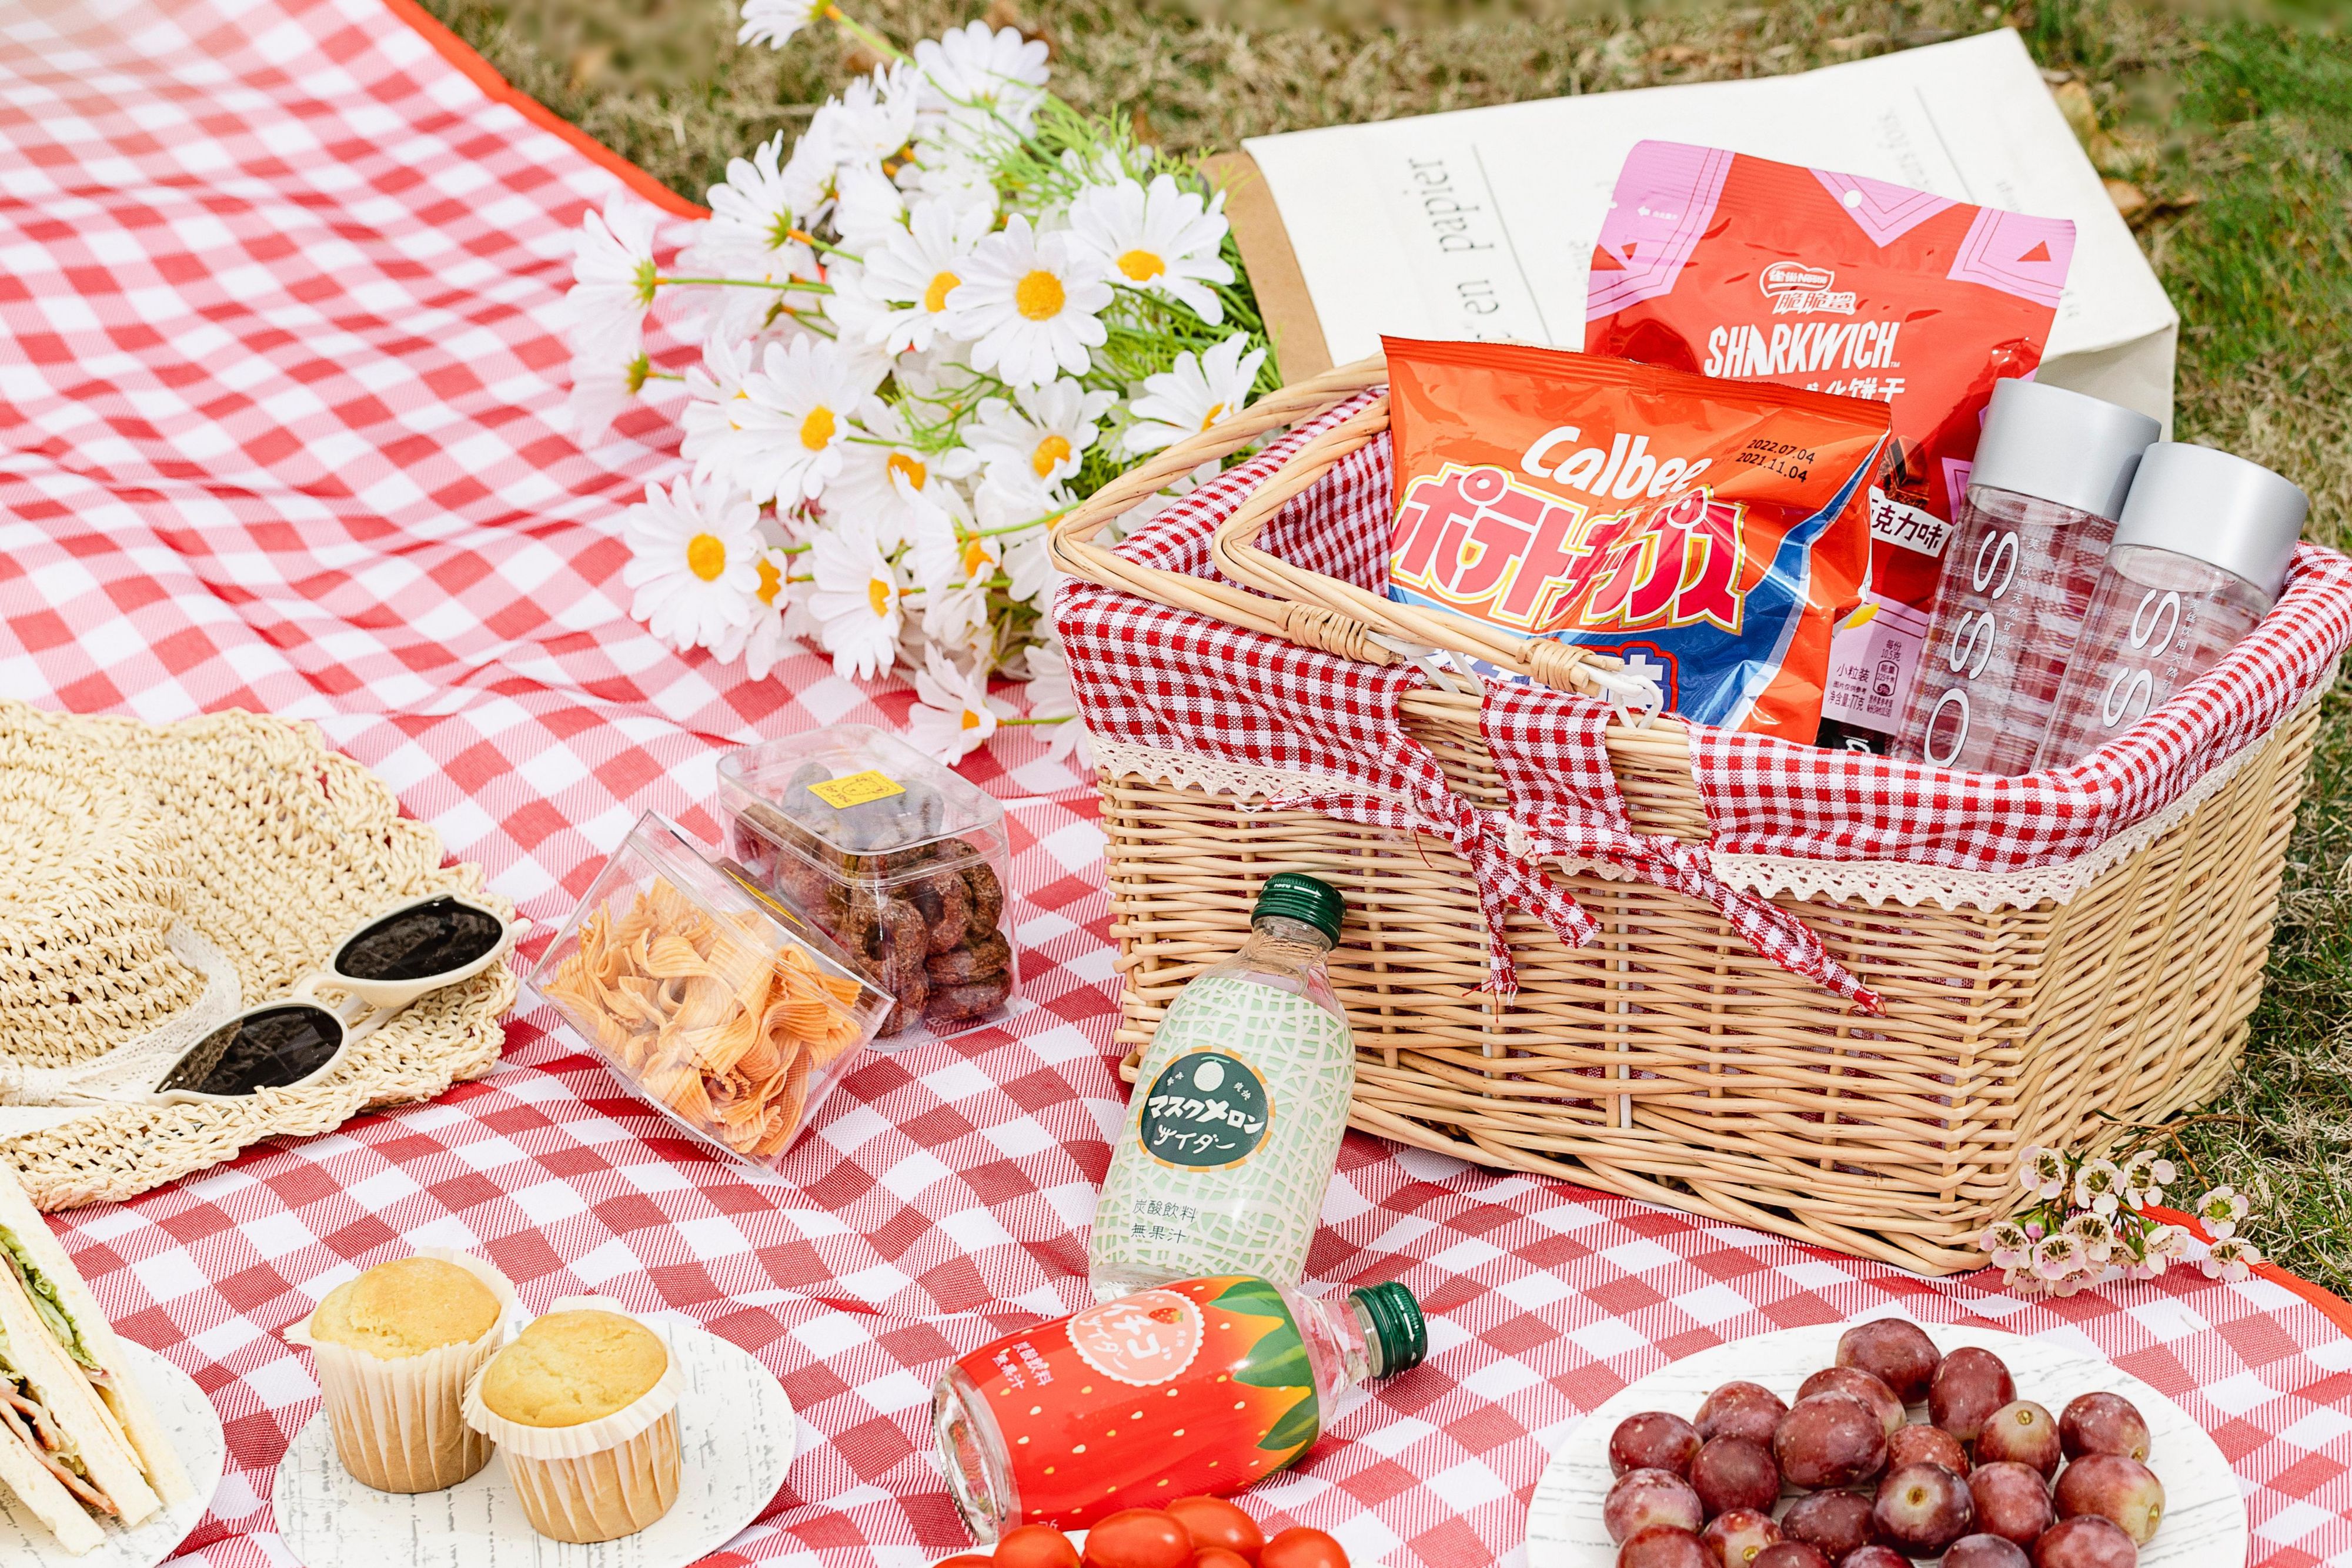 We have prepared everything you need for a cozy spring picnic. right here, right now. Enjoy a lakeside picnic with our muffins, croissants, sandwiches, two bottles of sparkling drinks, fresh fruits, snacks and mineral water.